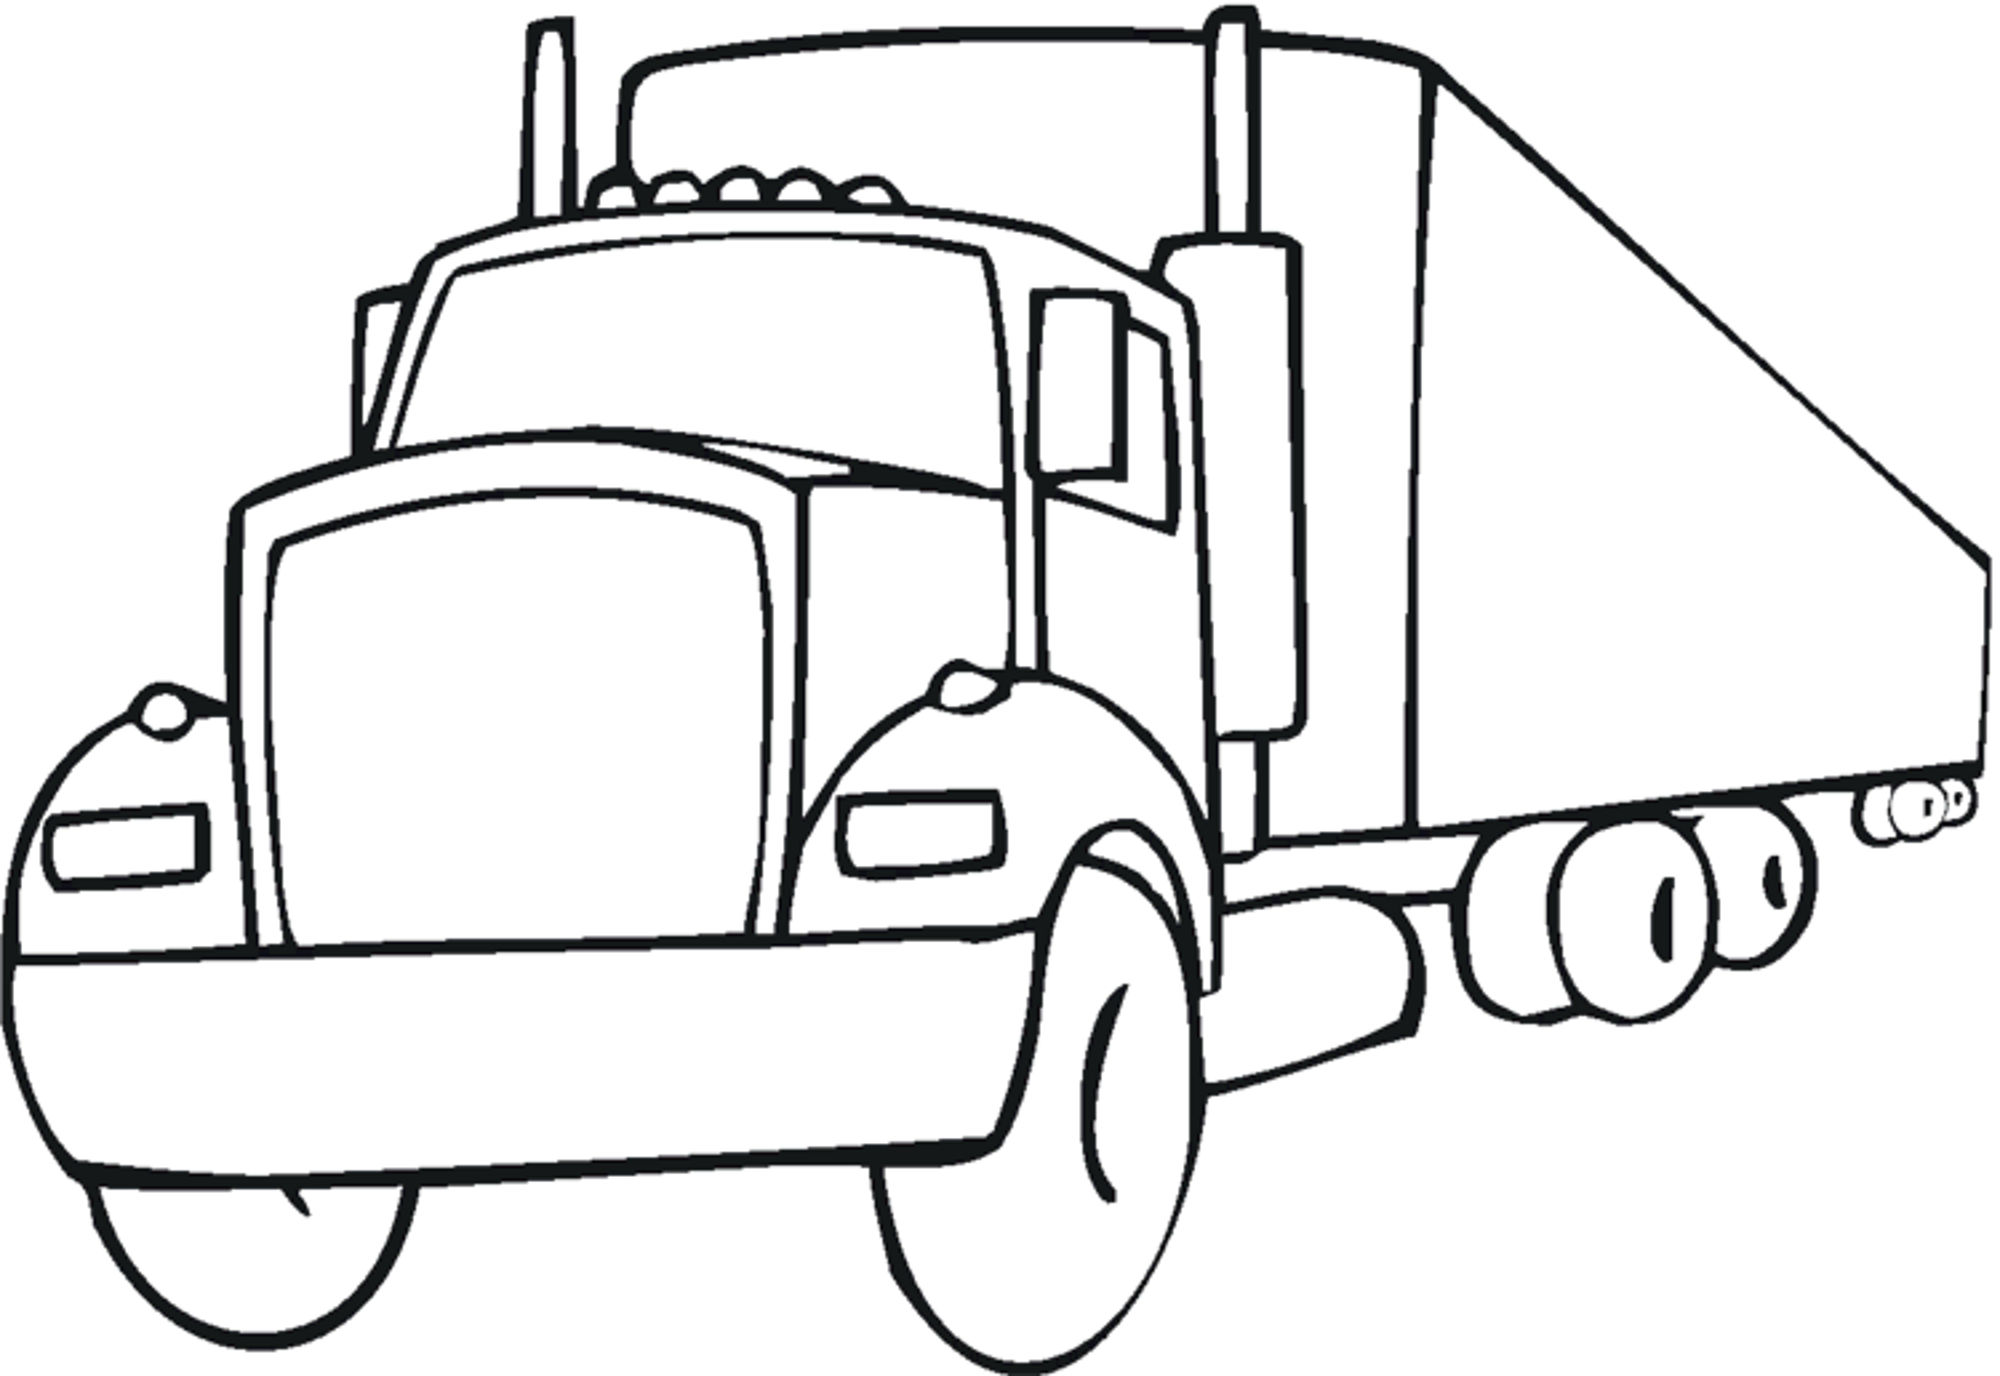 How to Draw a Semi-Truck - Easy Drawing Tutorial For Kids